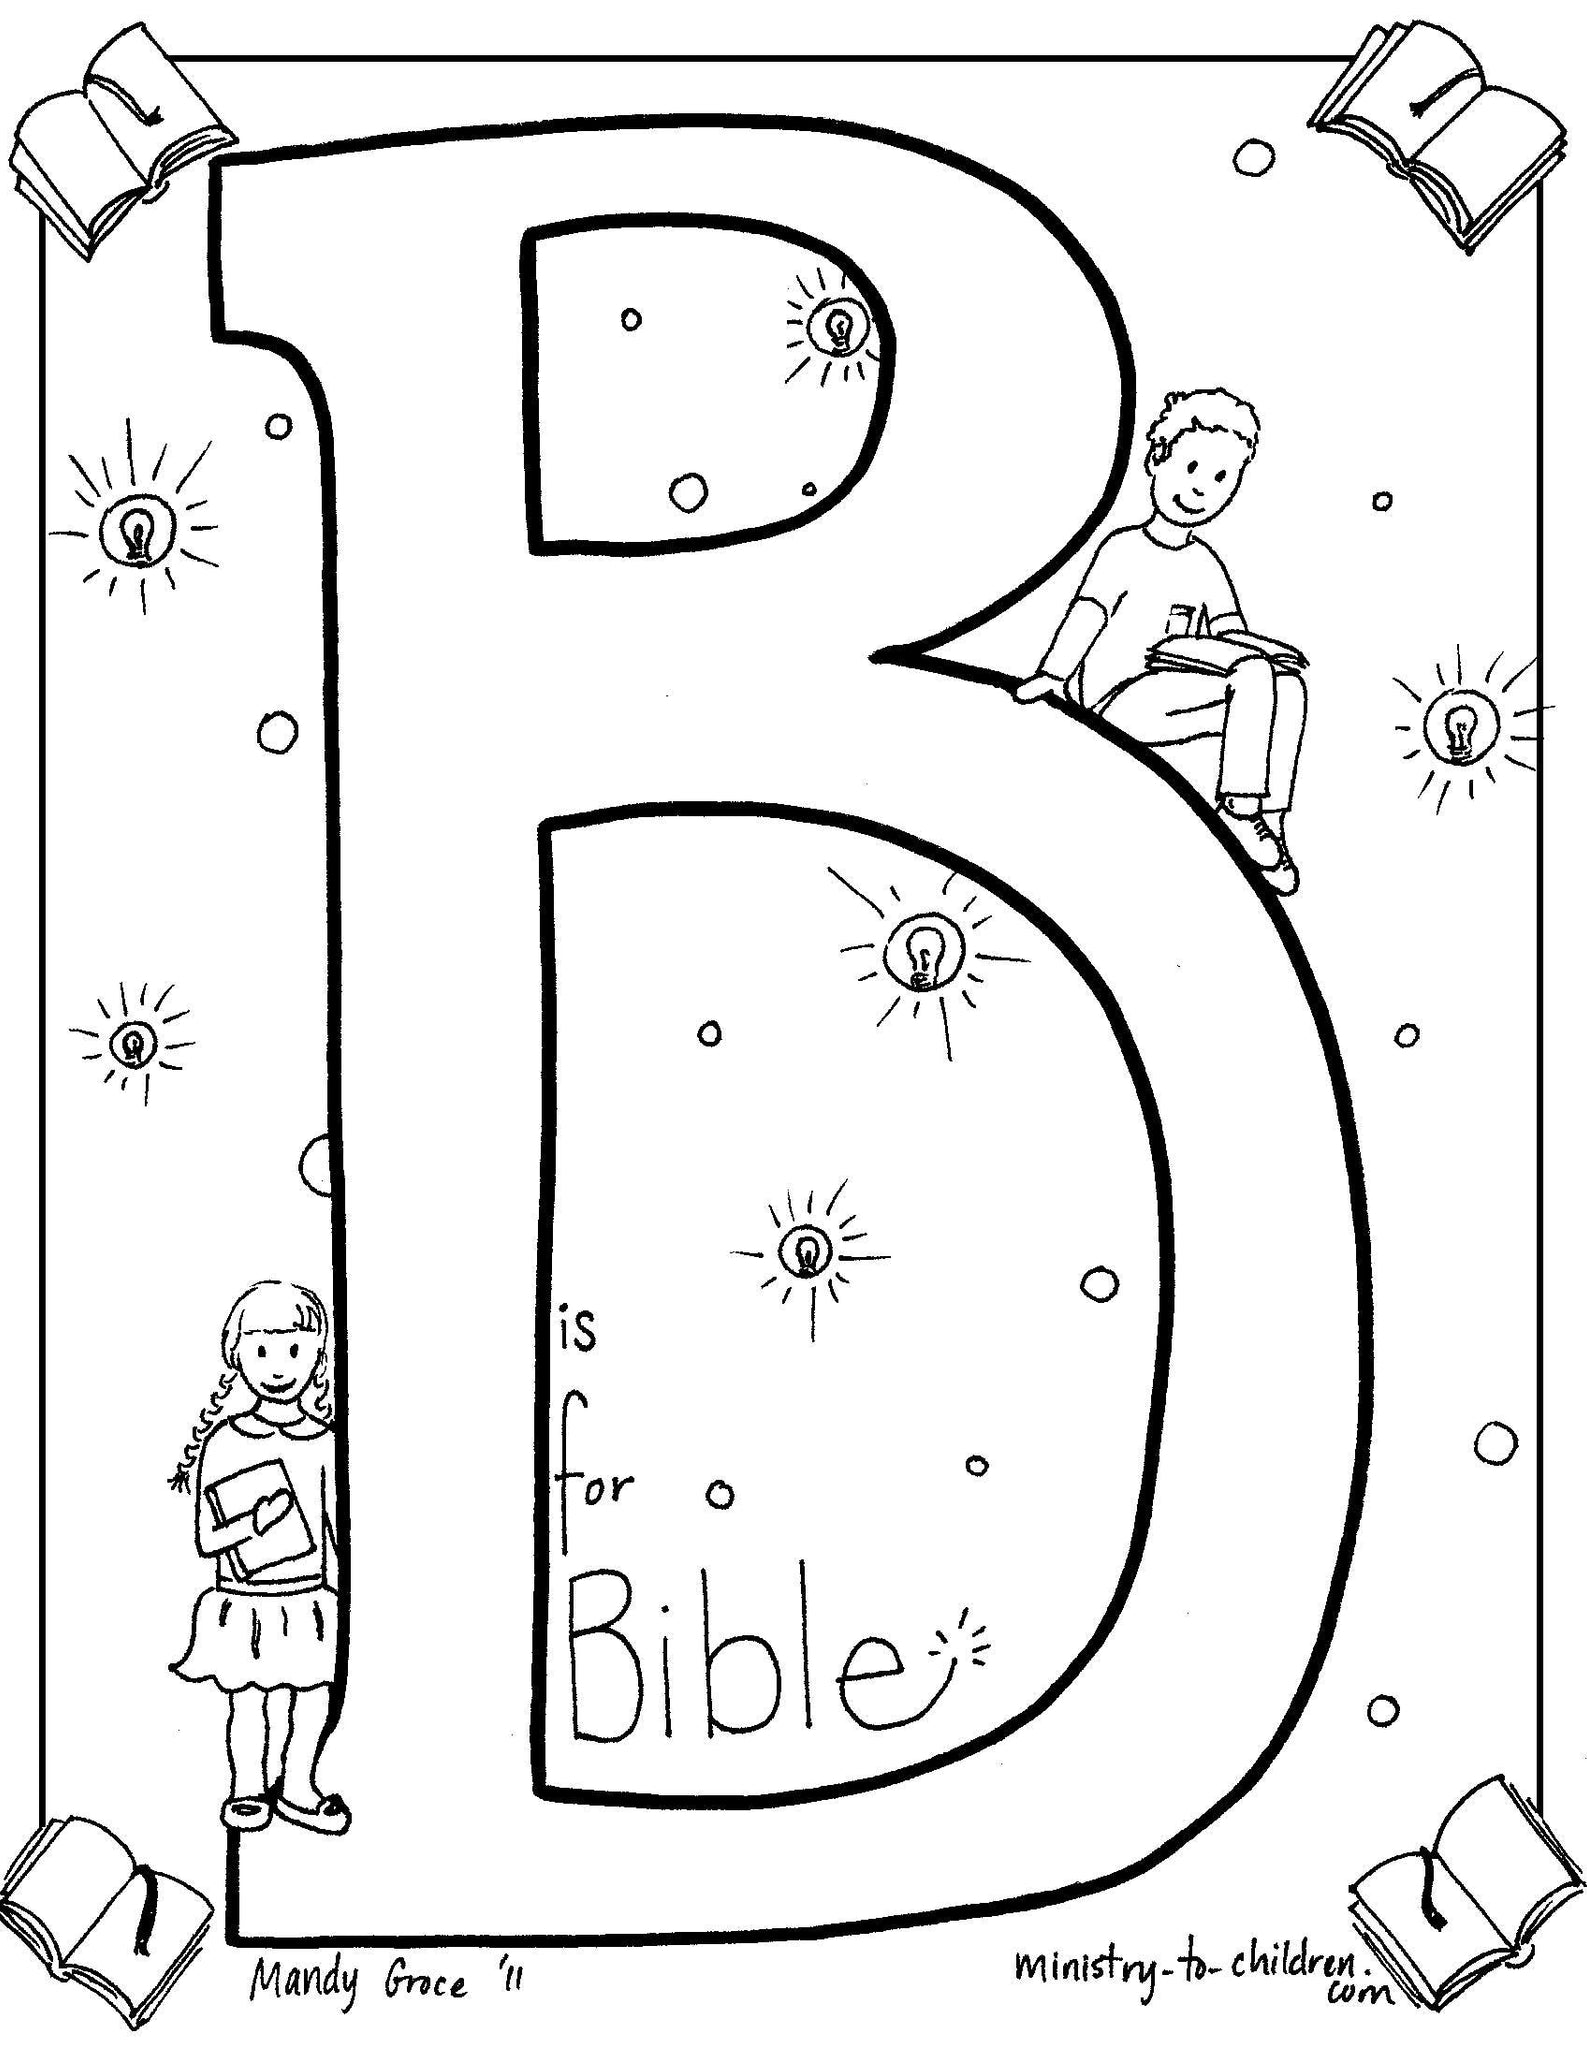 bible-alphabet-coloring-pages-26-pages-download-only-the-sunday